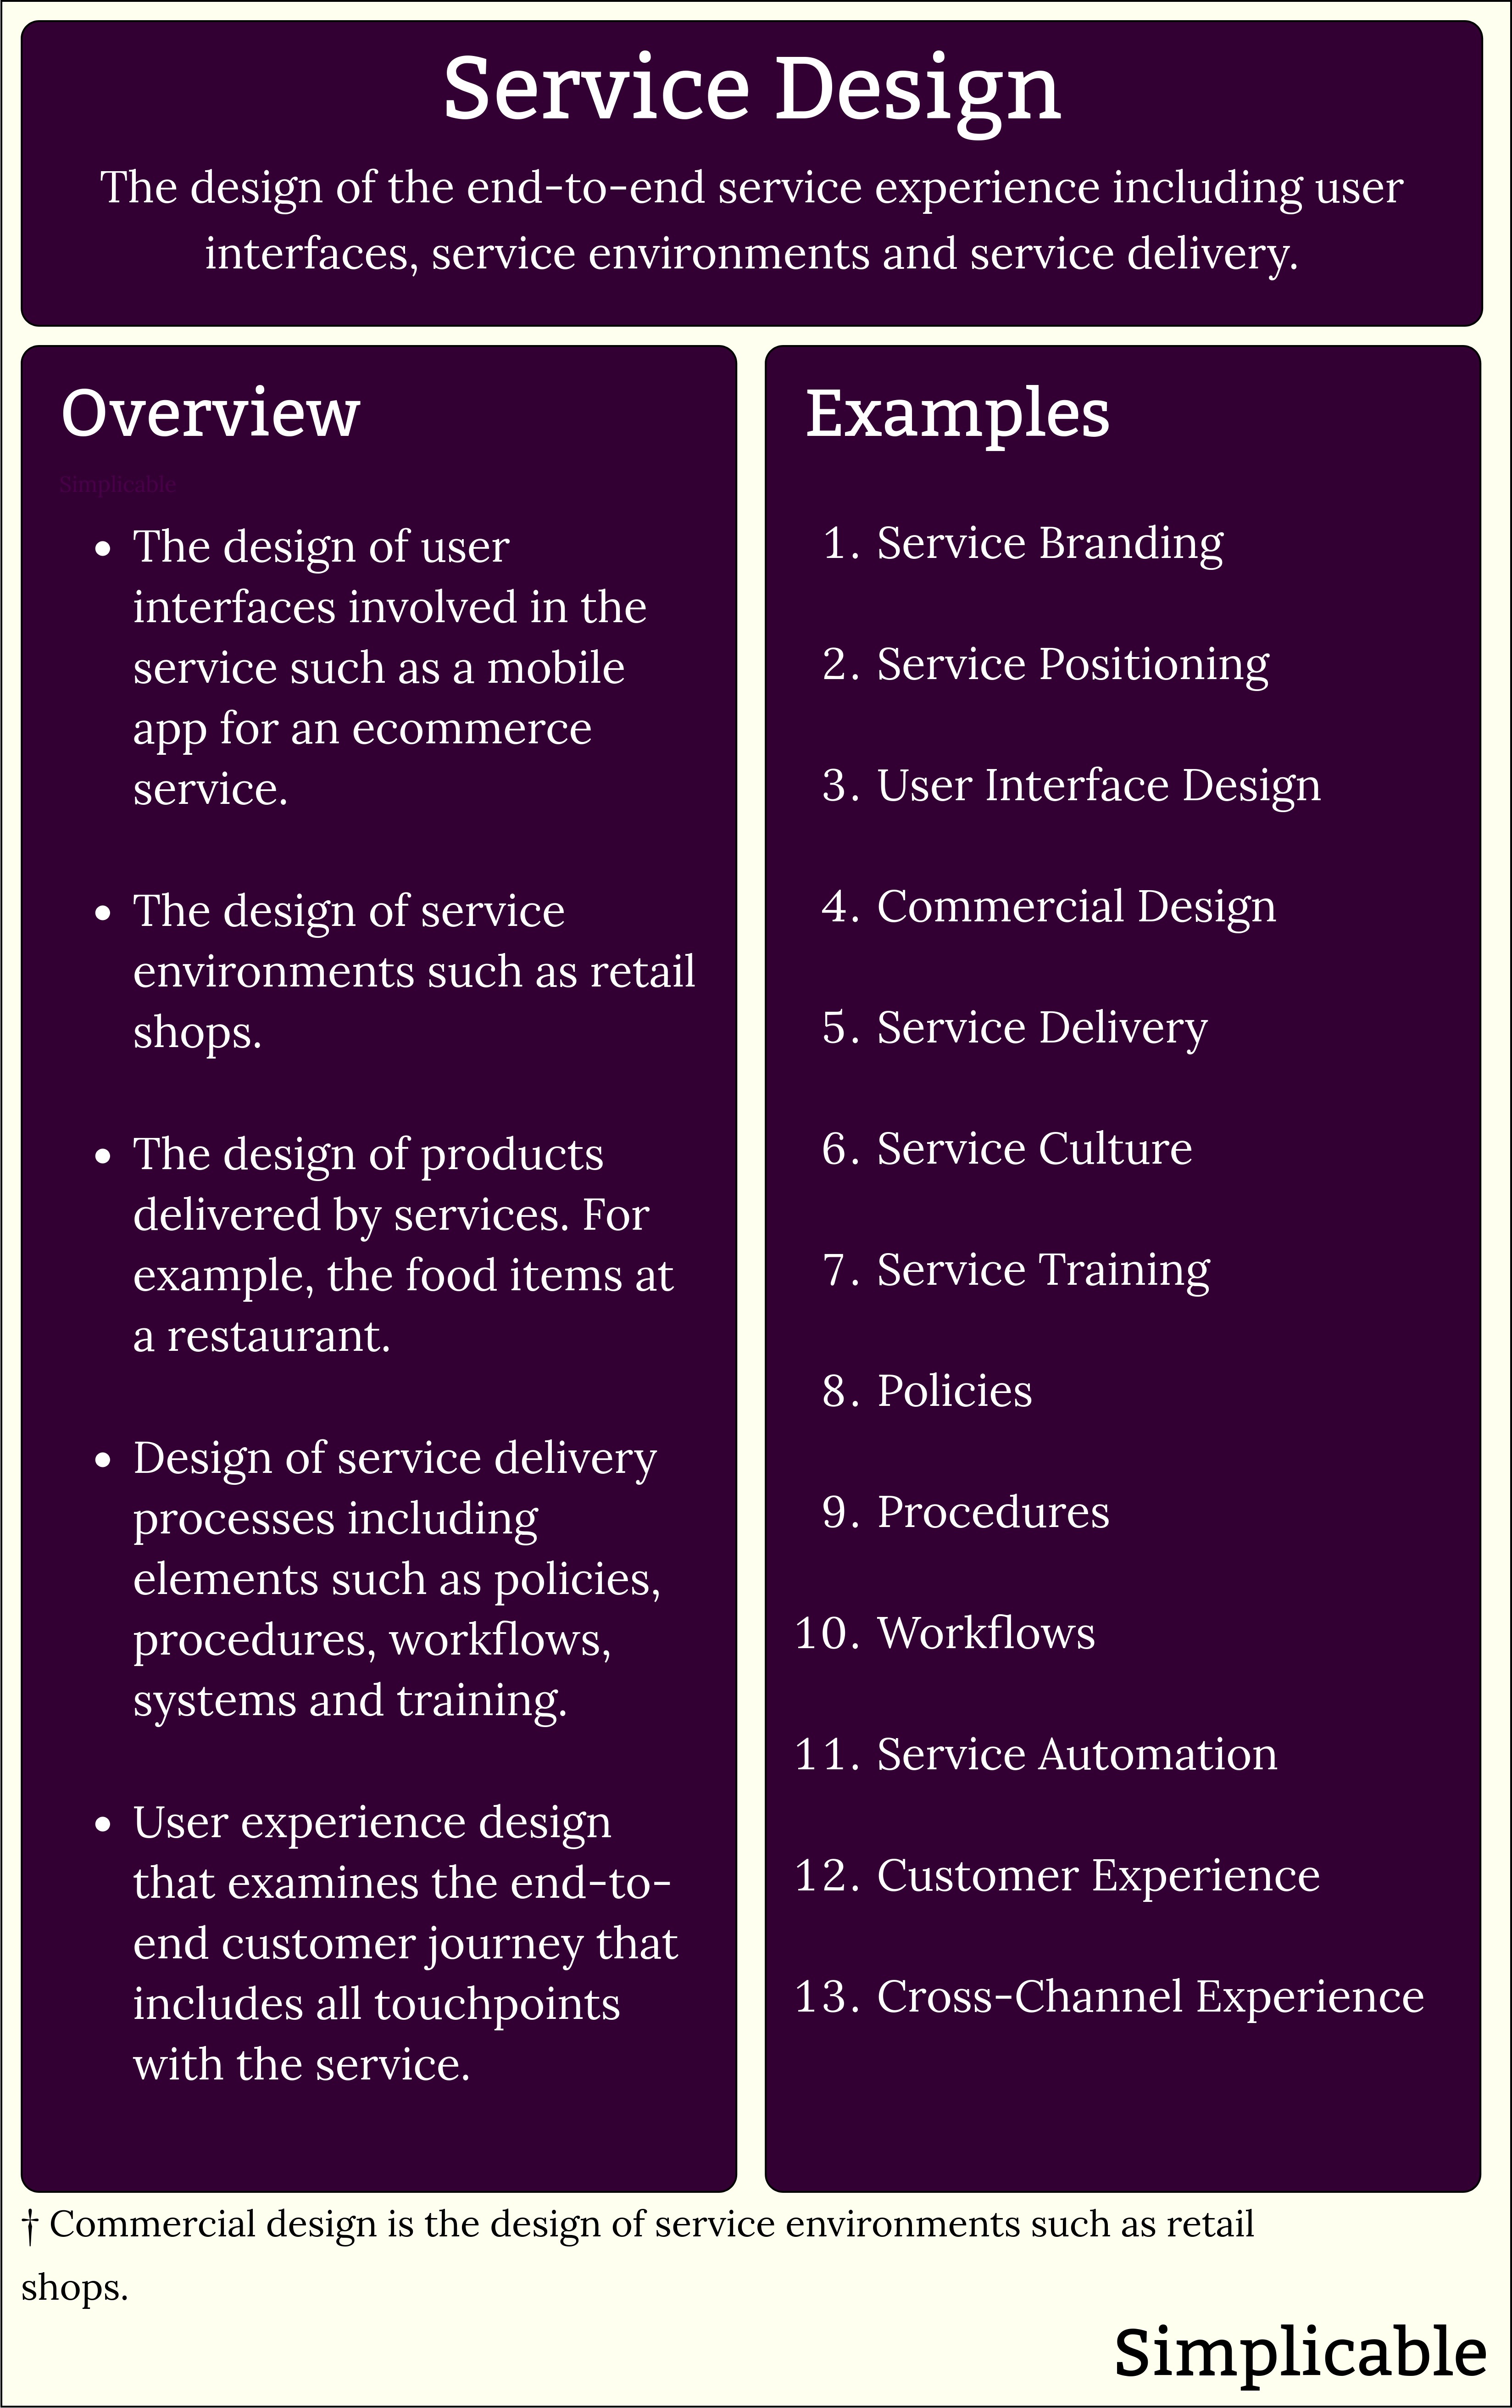 service experience design overview and examples